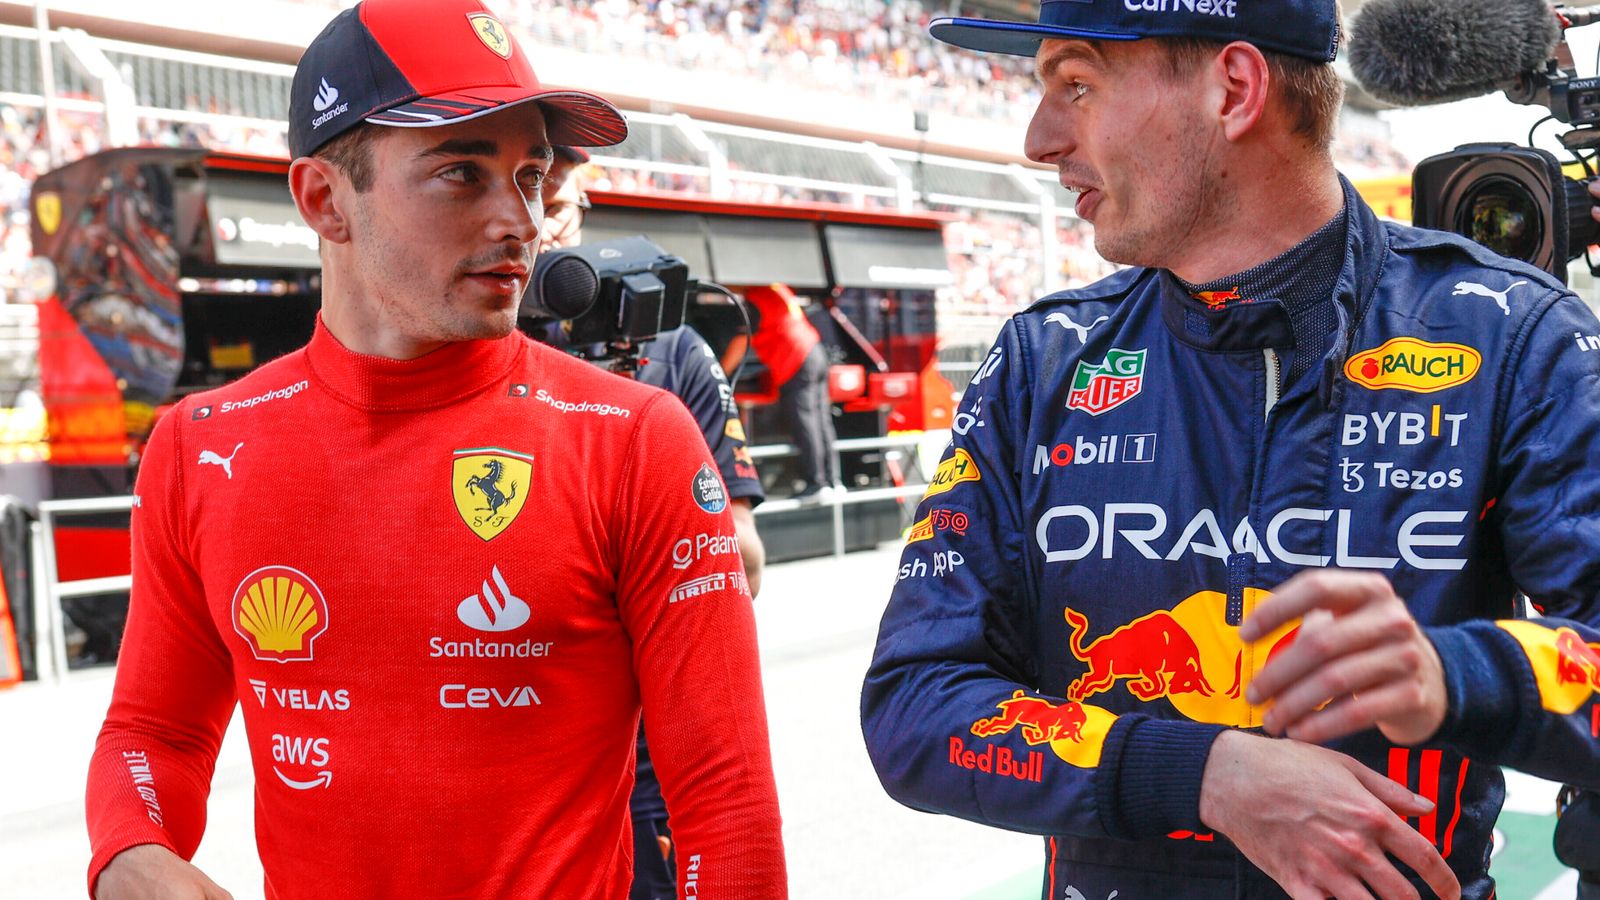 Spanish Grand Prix: Live updates from the race as Charles Leclerc starts on pole from title rival Max Verstappen